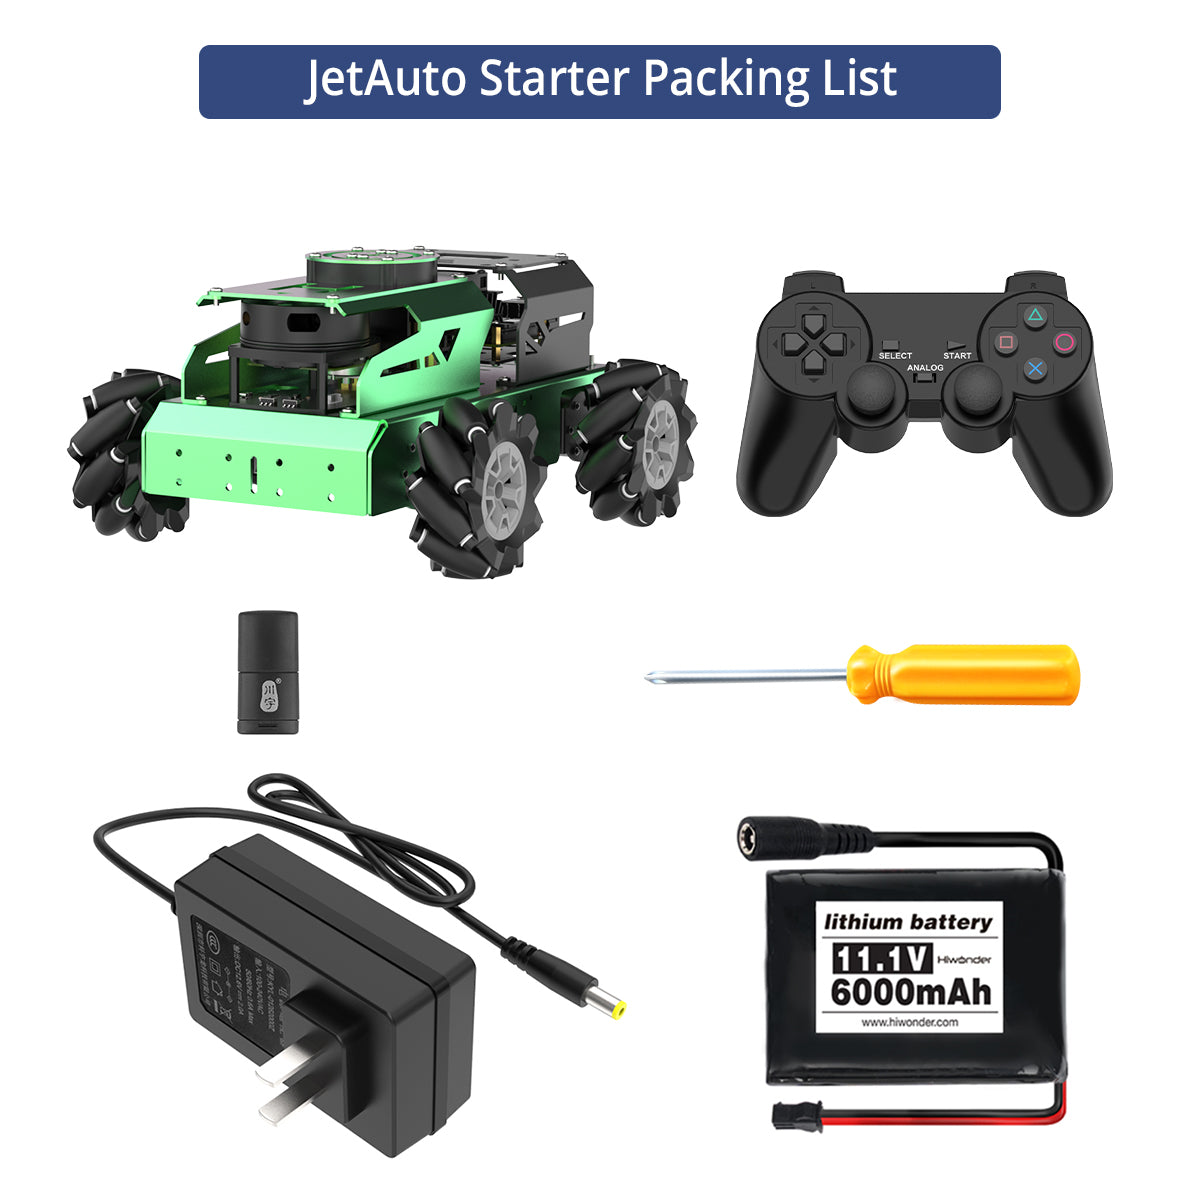 Battle Robot Kit Includes Wireless Controller, Battery, And More -  Electrical Engineering News and Products